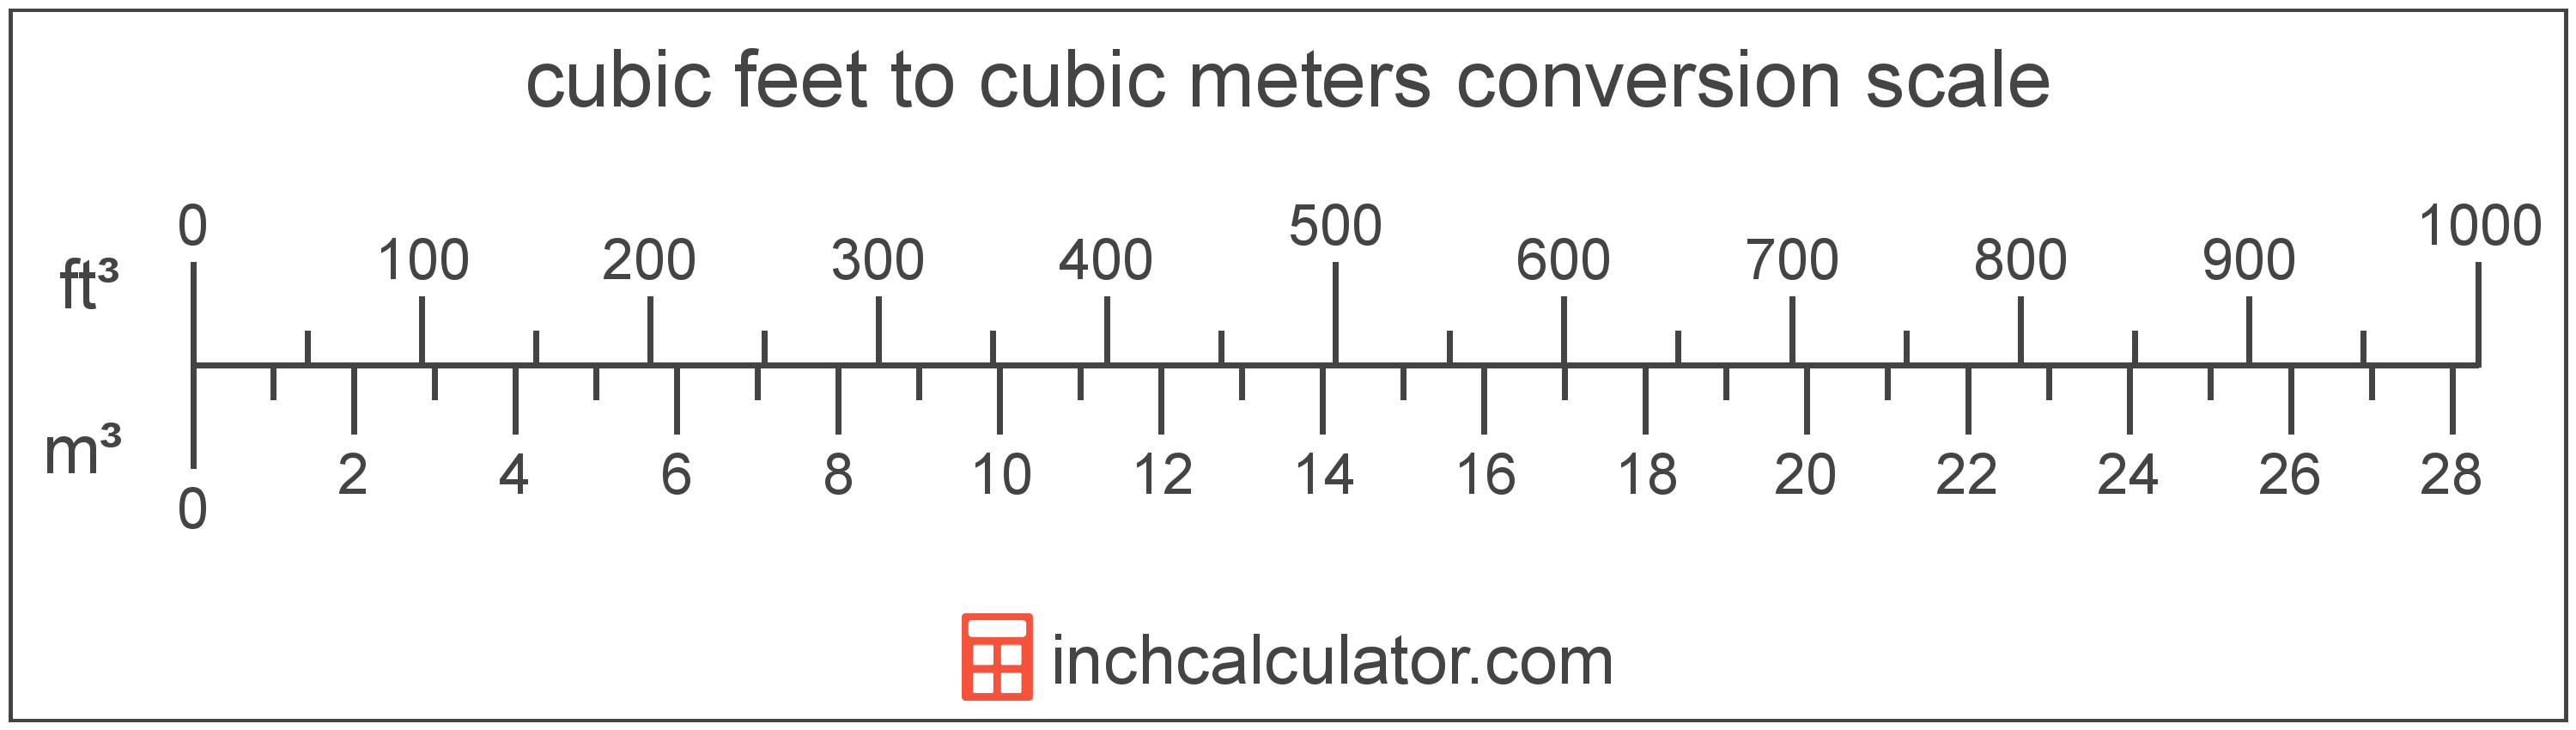 how to convert measurements to cubic feet